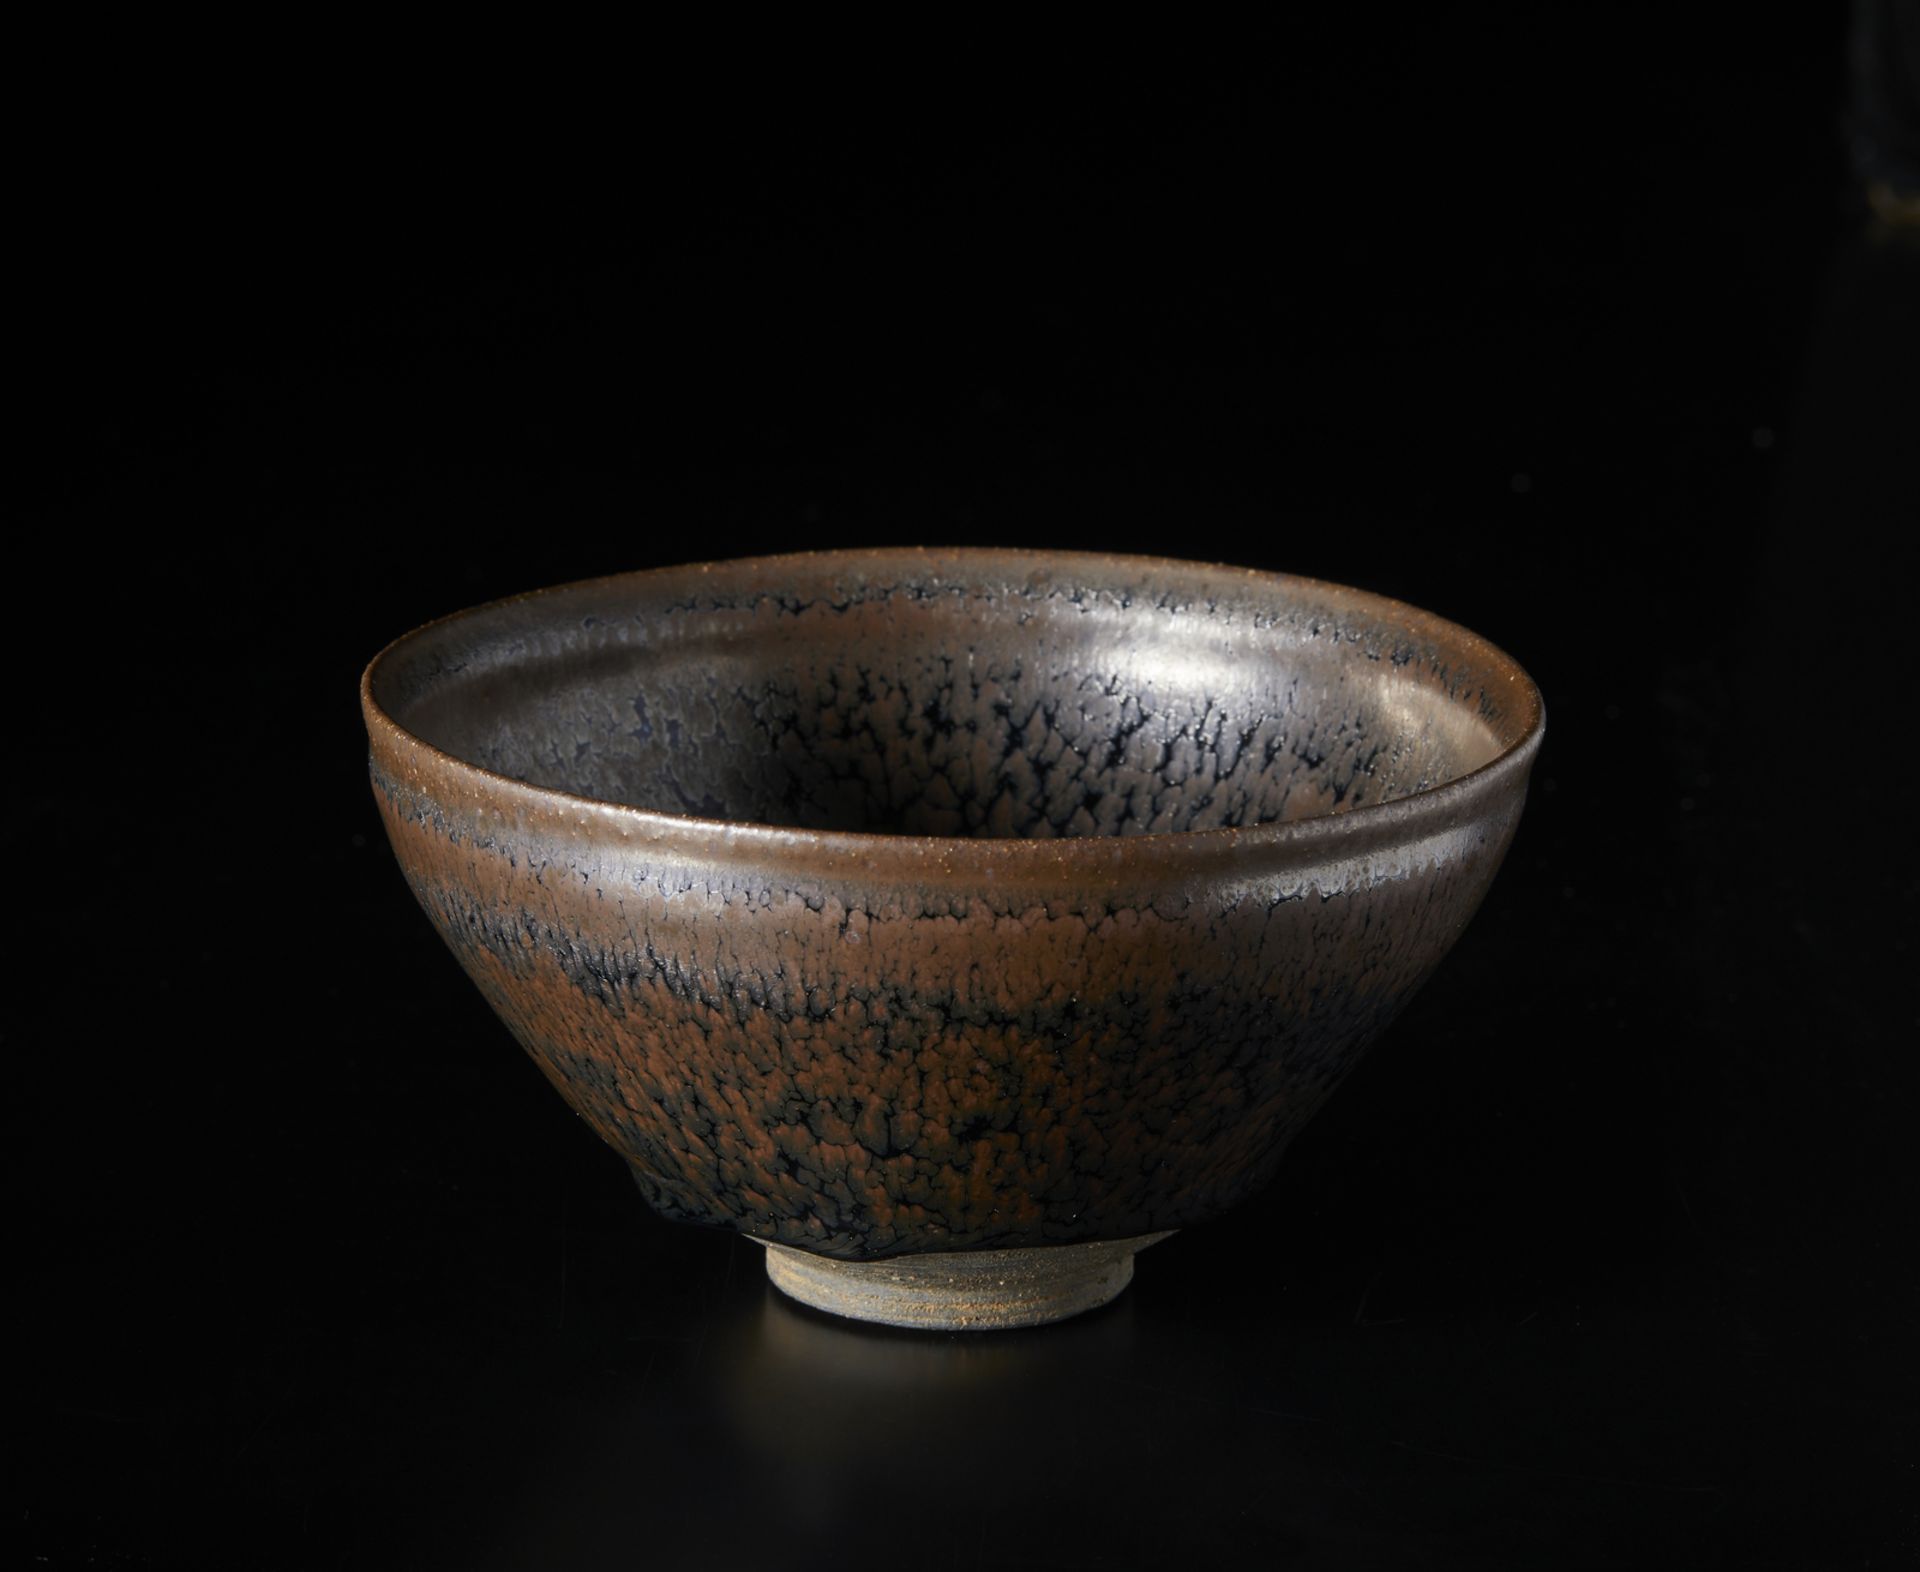 Arte Cinese  A jianyao oil spotted pottery bowlChina, Song dynasty, 12th century .